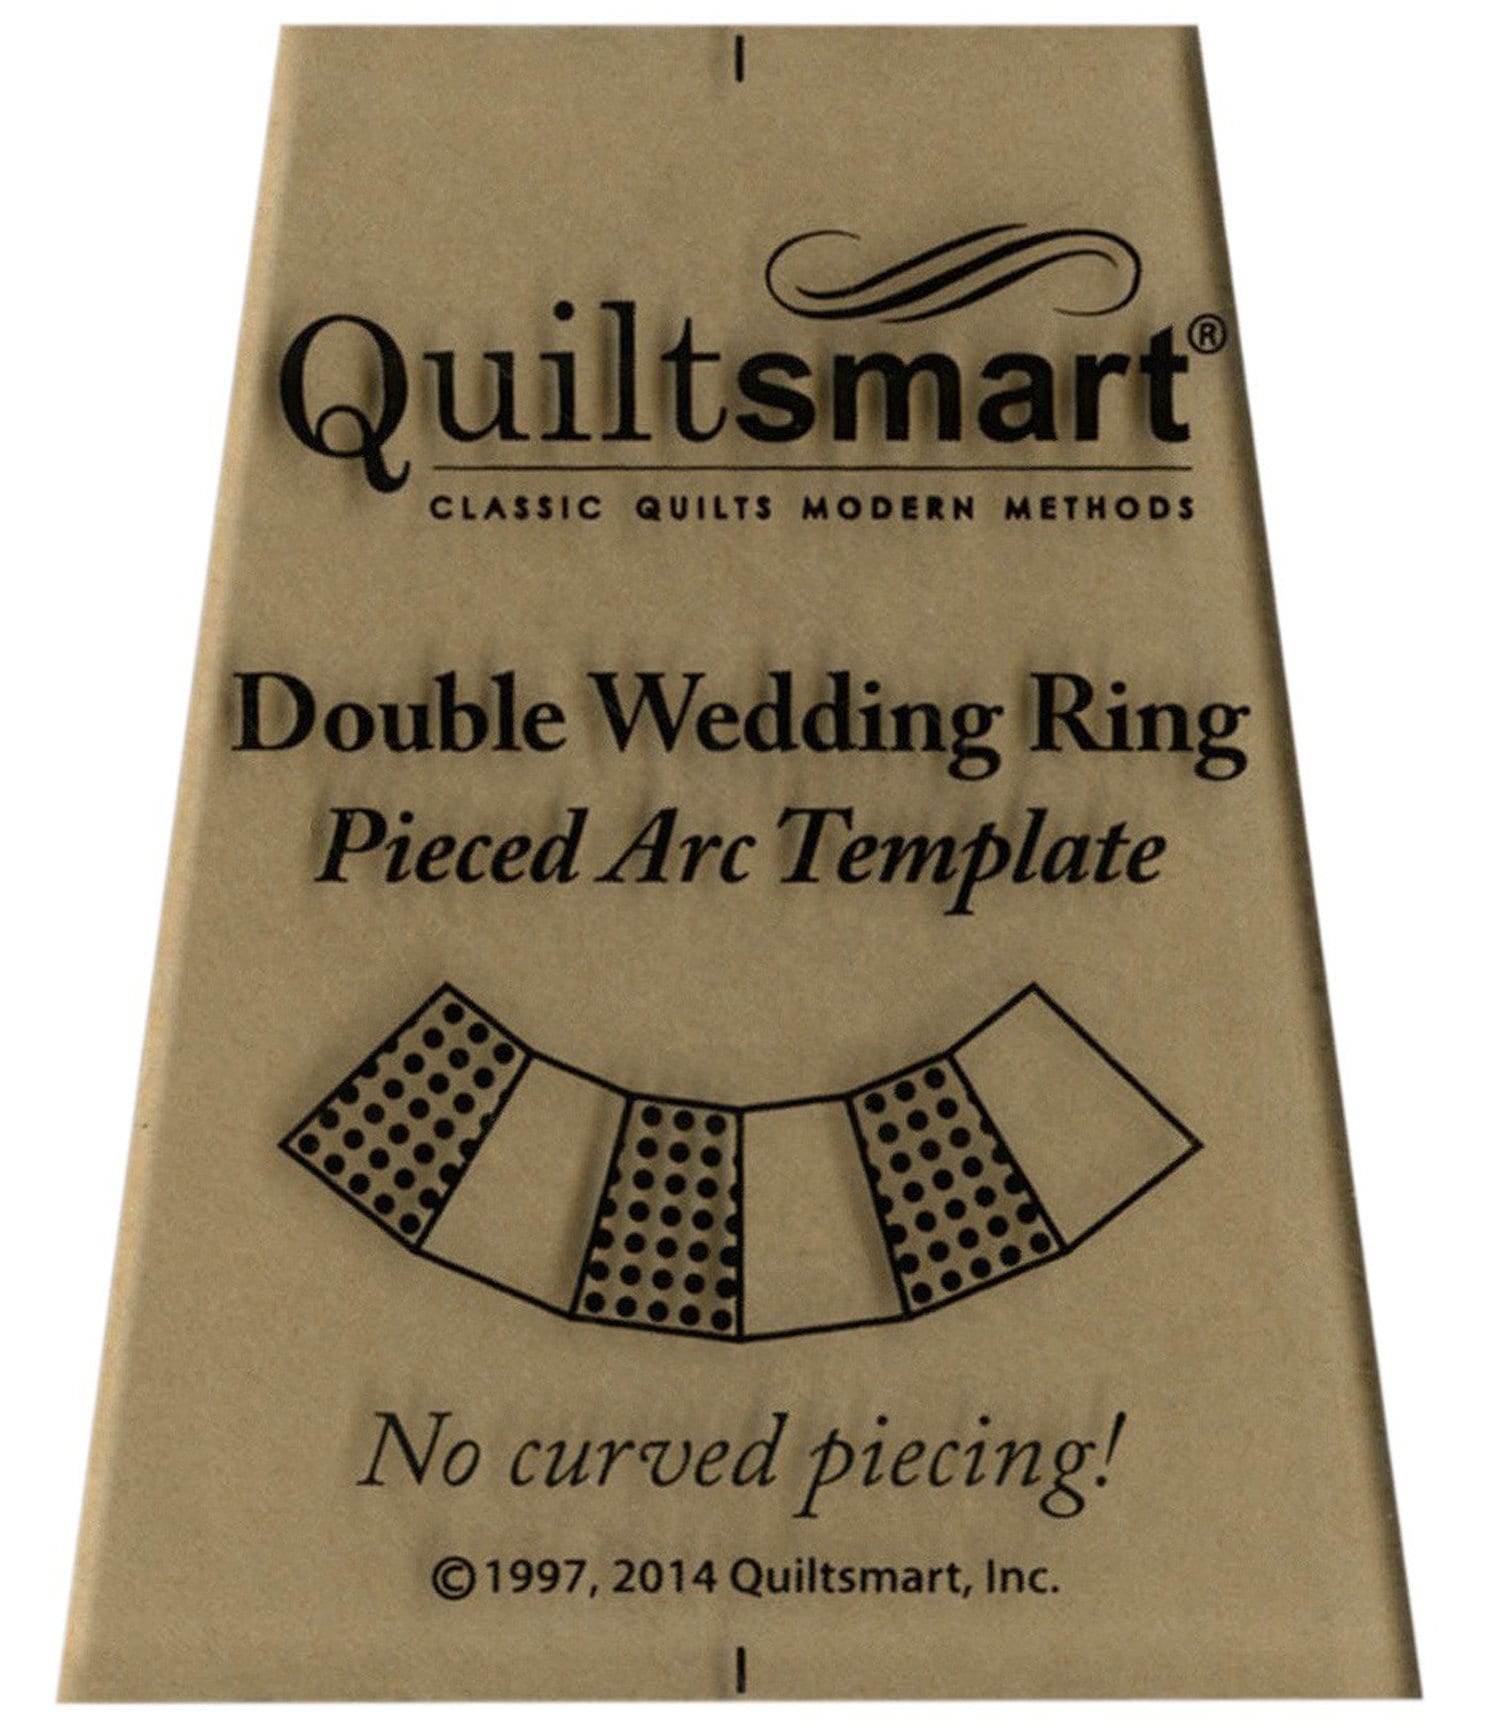 Quiltsmart Double Wedding Ring Template, Acrylic Wedge Template, DWRTD, Pieced Arc Template, Quilting Template Ruler